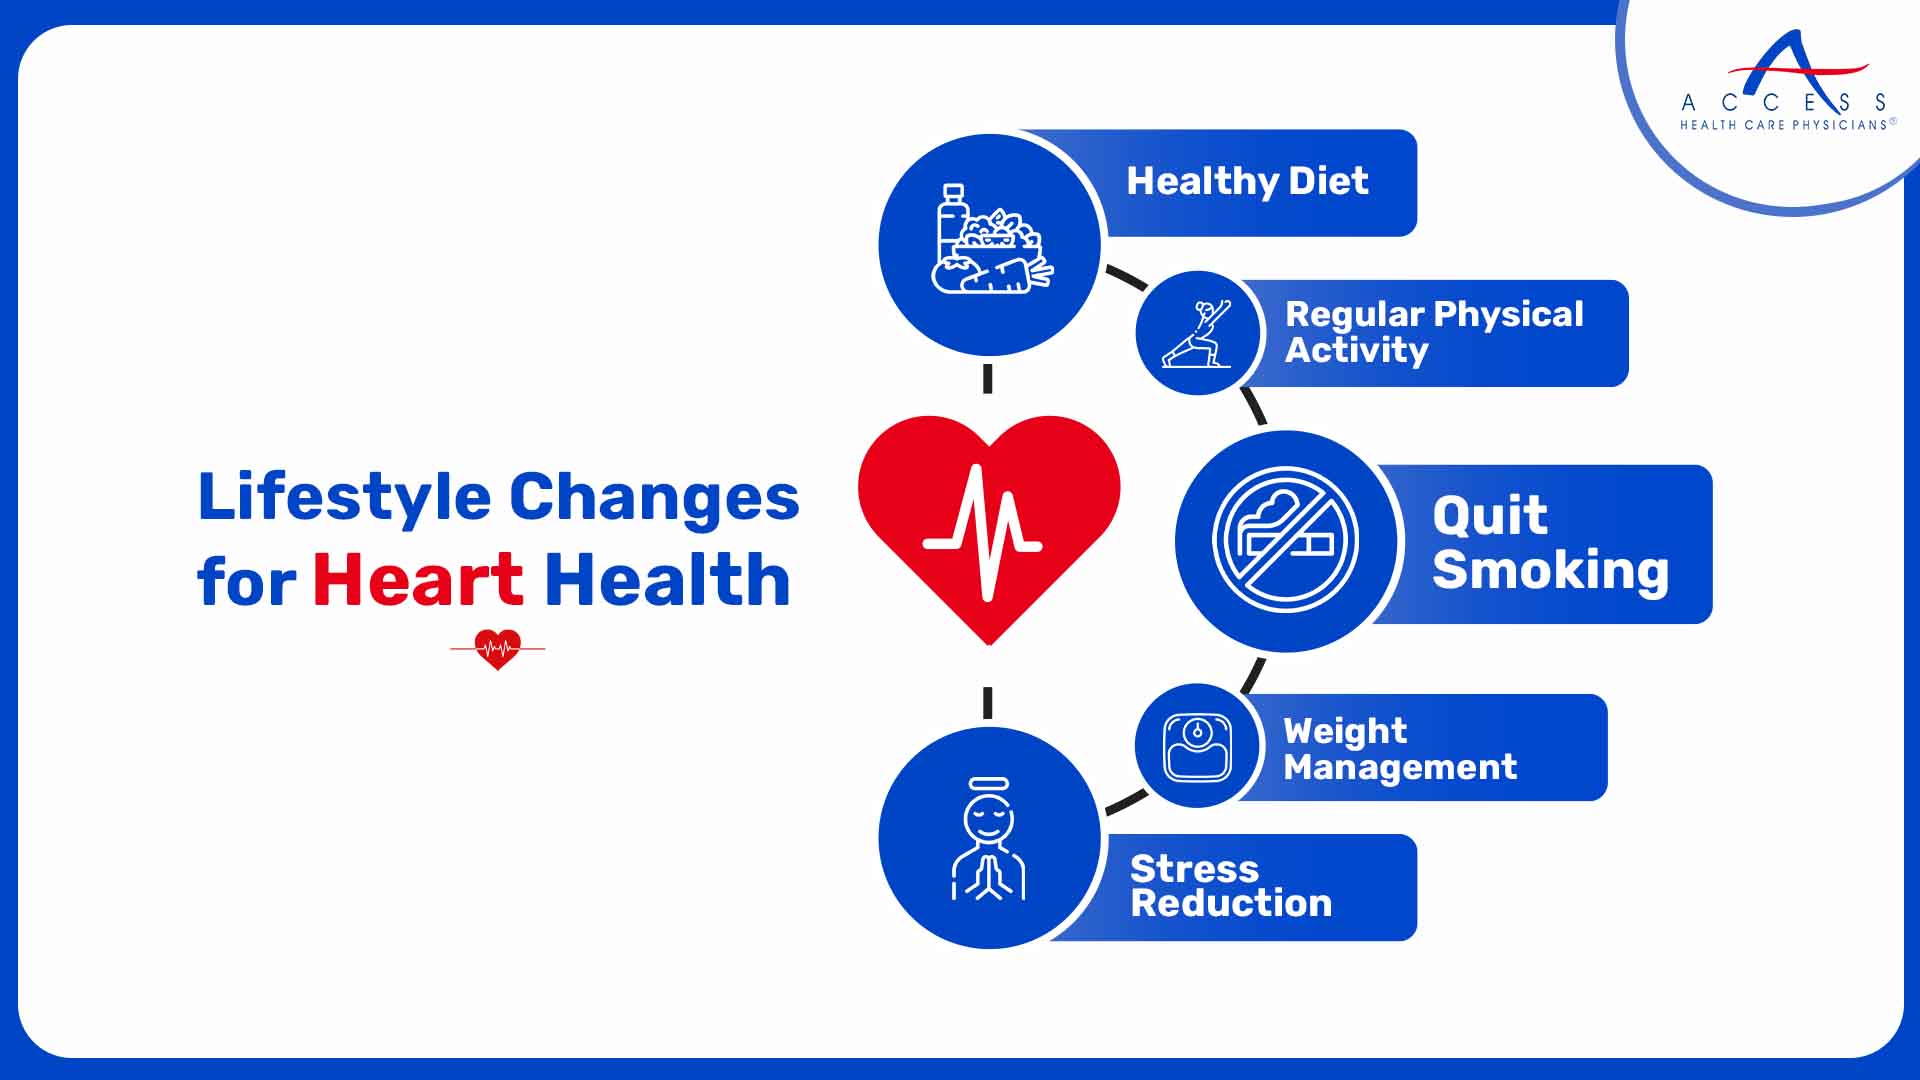 Lifestyle Changes for Heart Health